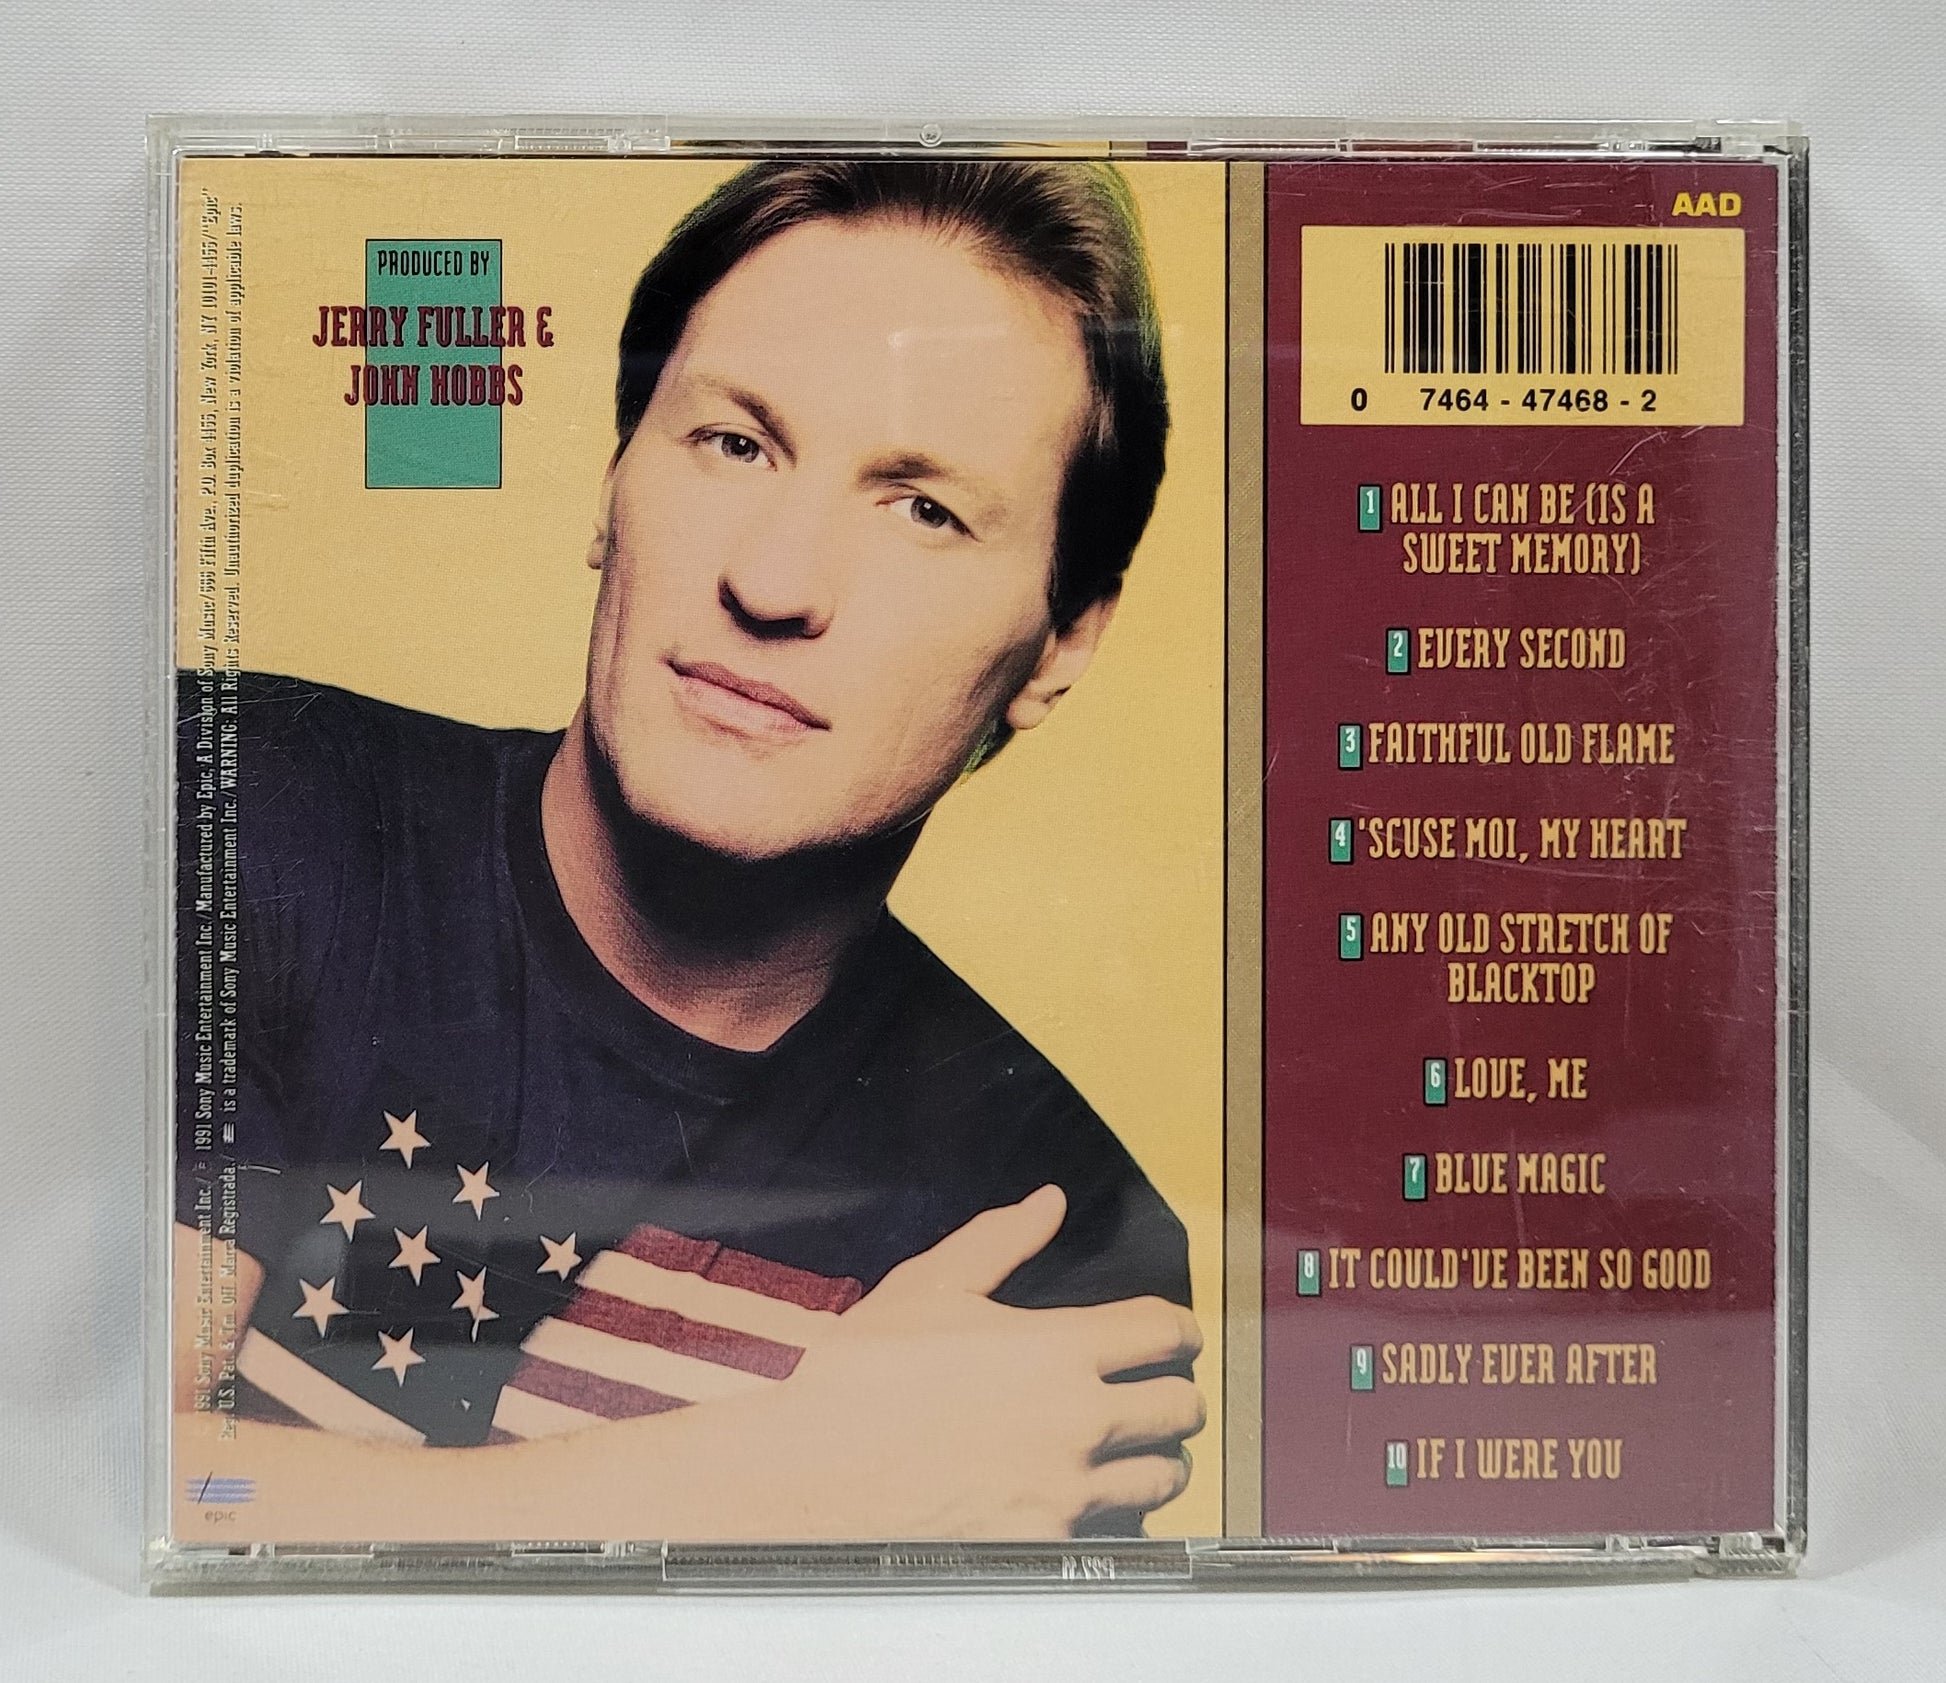 Collin Raye - All I Can Be [1991 Used CD]